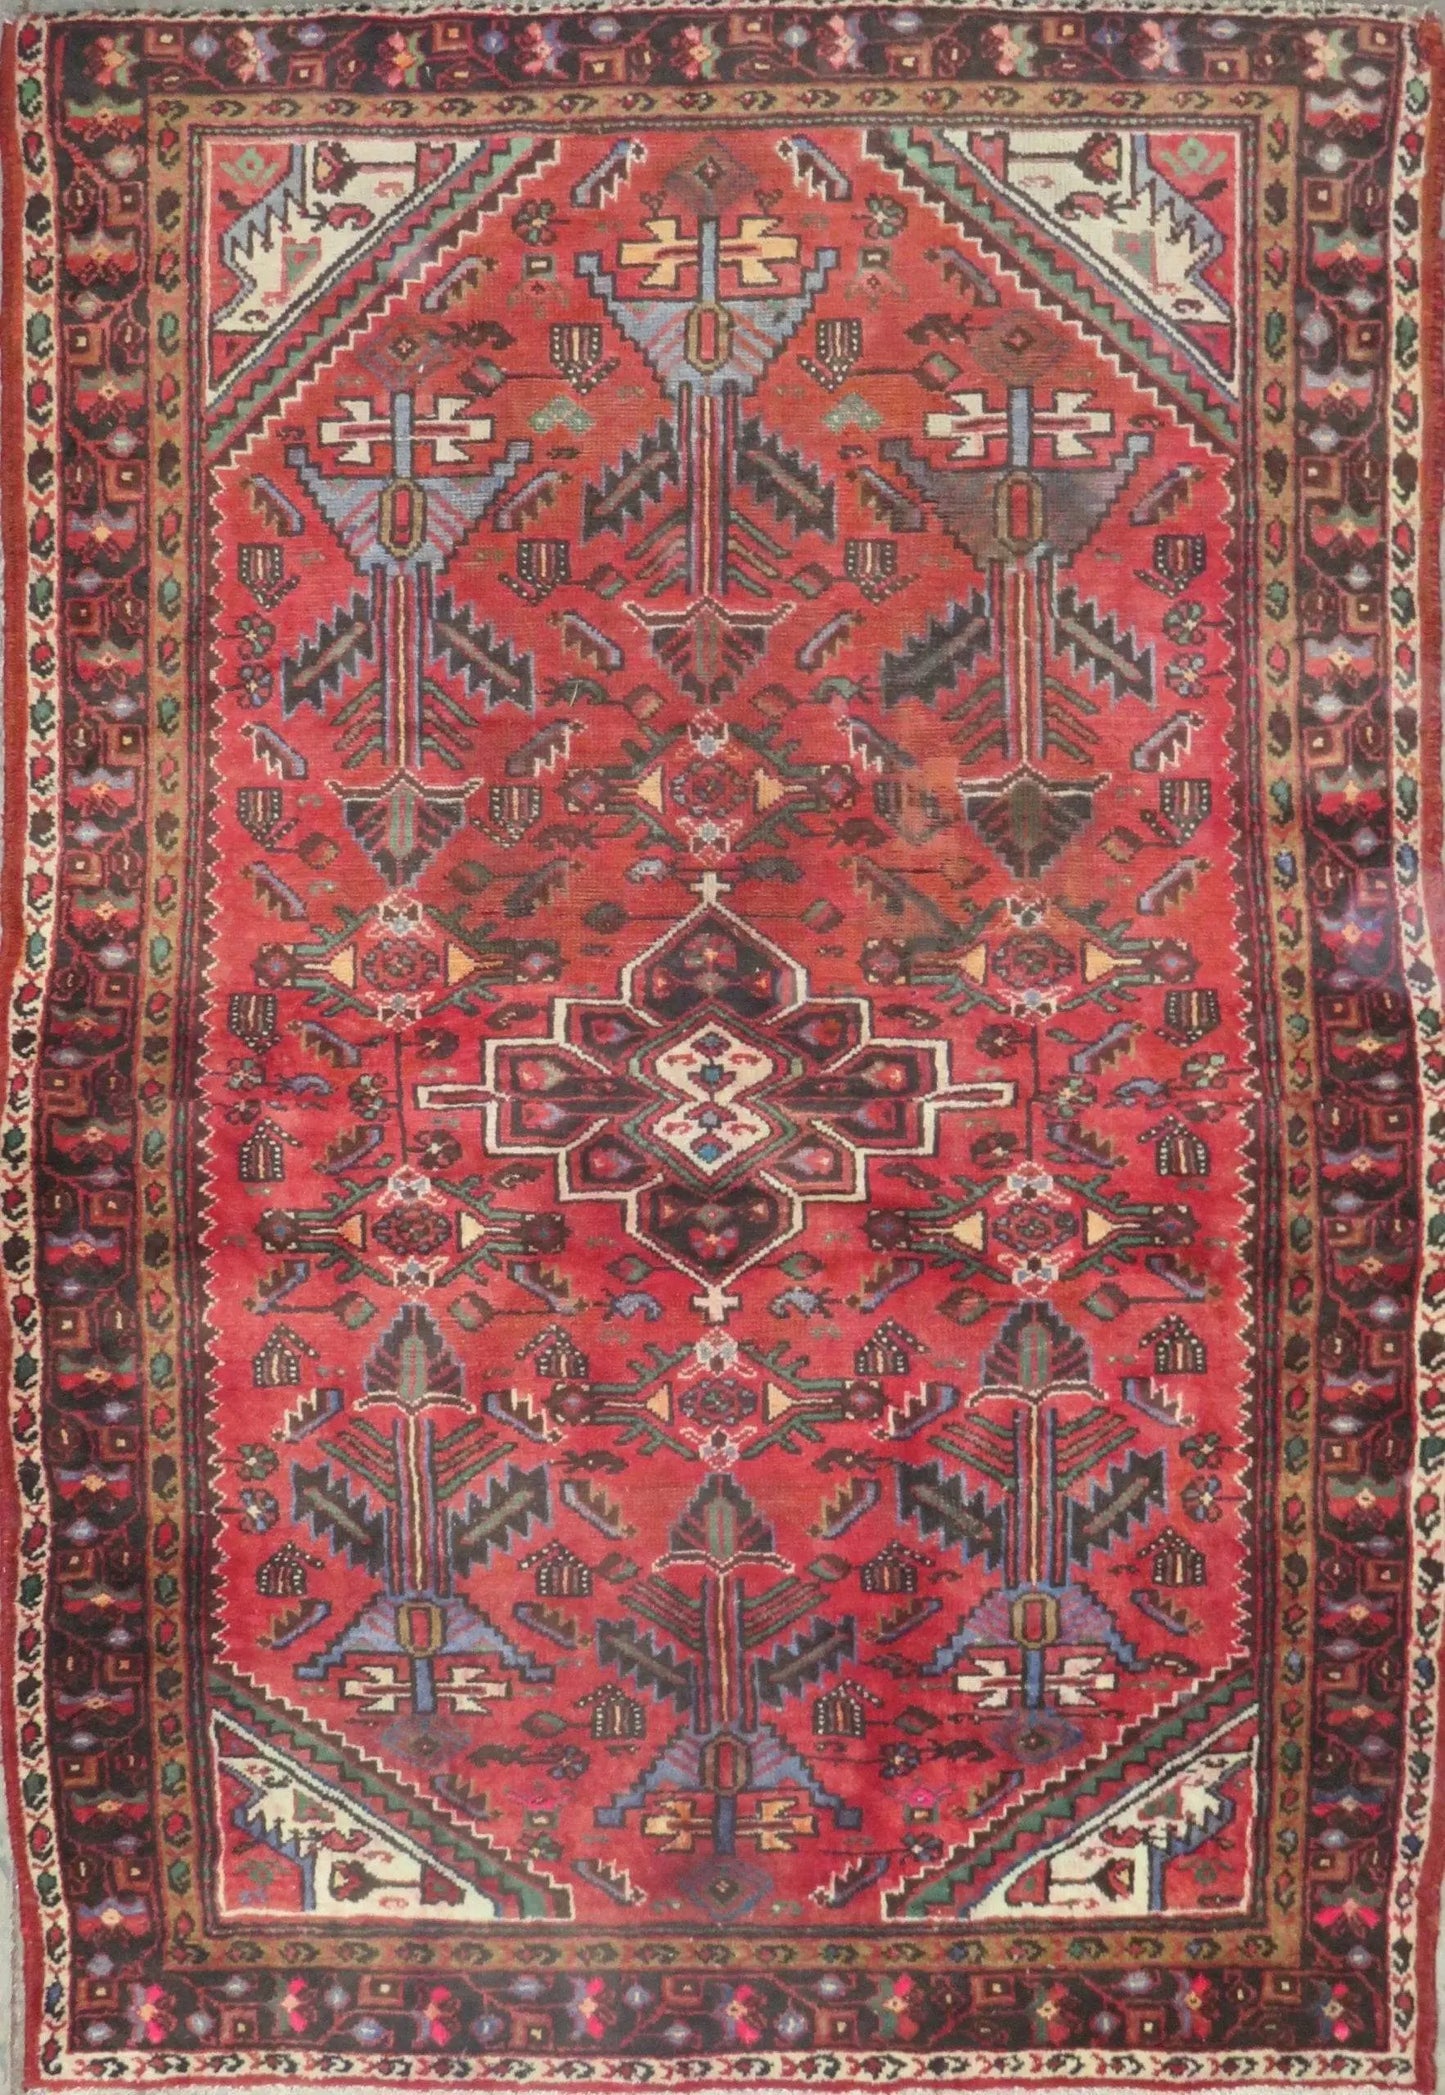 Hand-Knotted Persian Wool Rug _ Luxurious Vintage Design, 6'10" x 4'8", Artisan Crafted